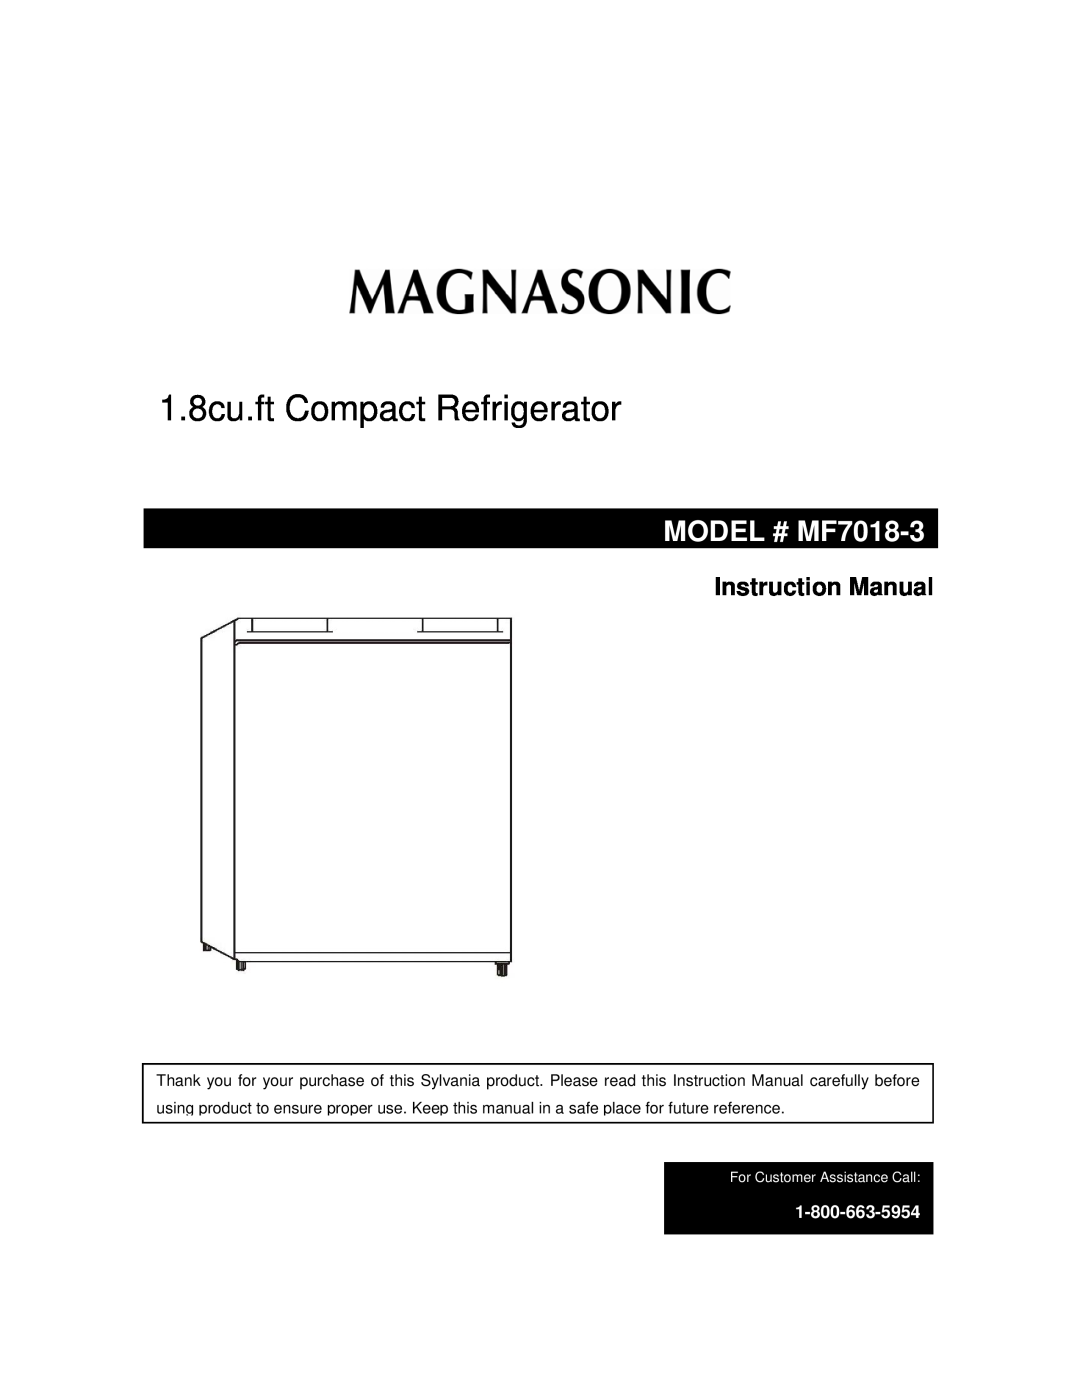 Magnasonic instruction manual 1.8cu.ft Compact Refrigerator, MODEL # MF7018-3, For Customer Assistance Call 